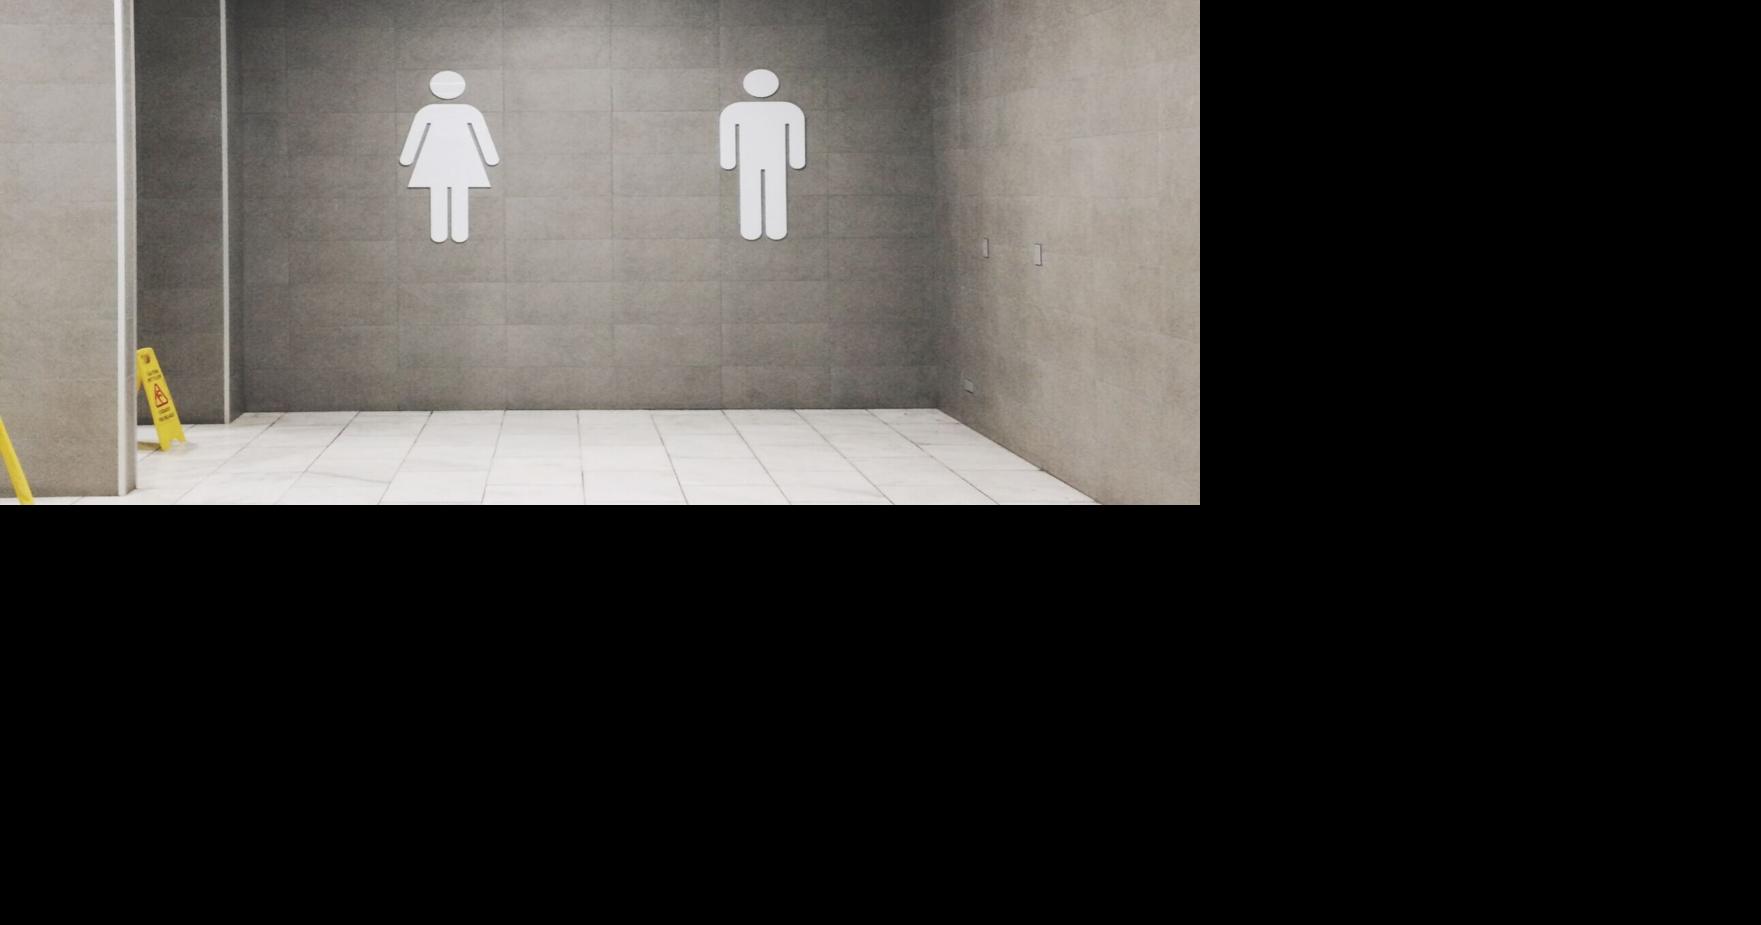 Lawmakers, ACLU weigh in on Illinois school district’s transgender bathroom policy Photo